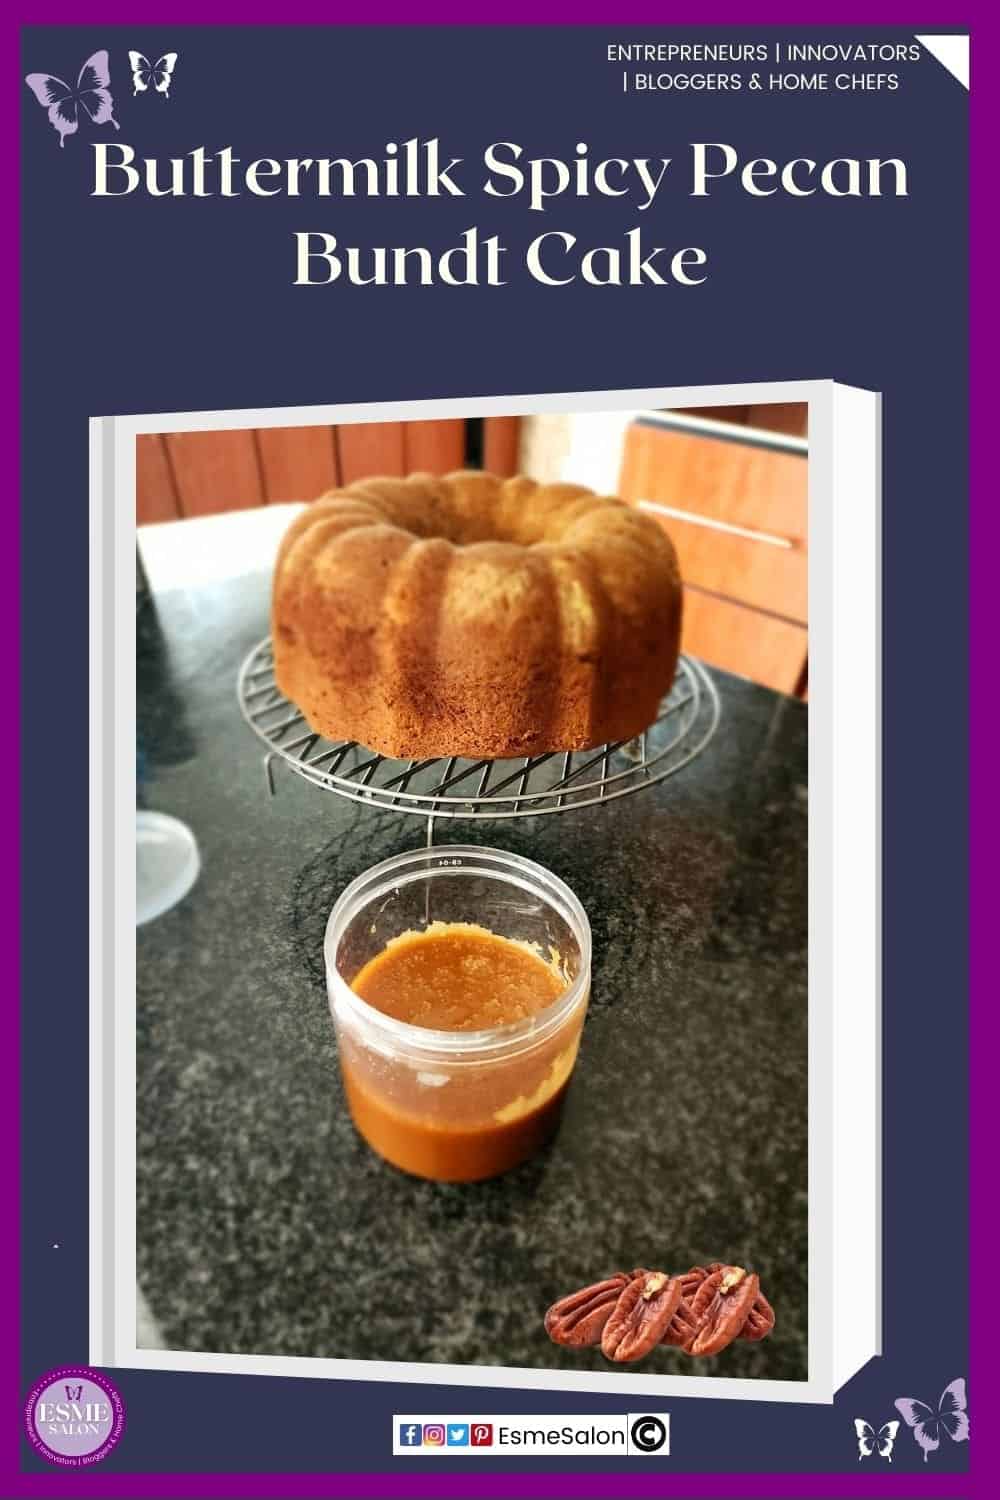 an image of a Buttermilk Spicy Pecan Bundt Cake undecorated with the butterscotch sauce in a glass container still to be added